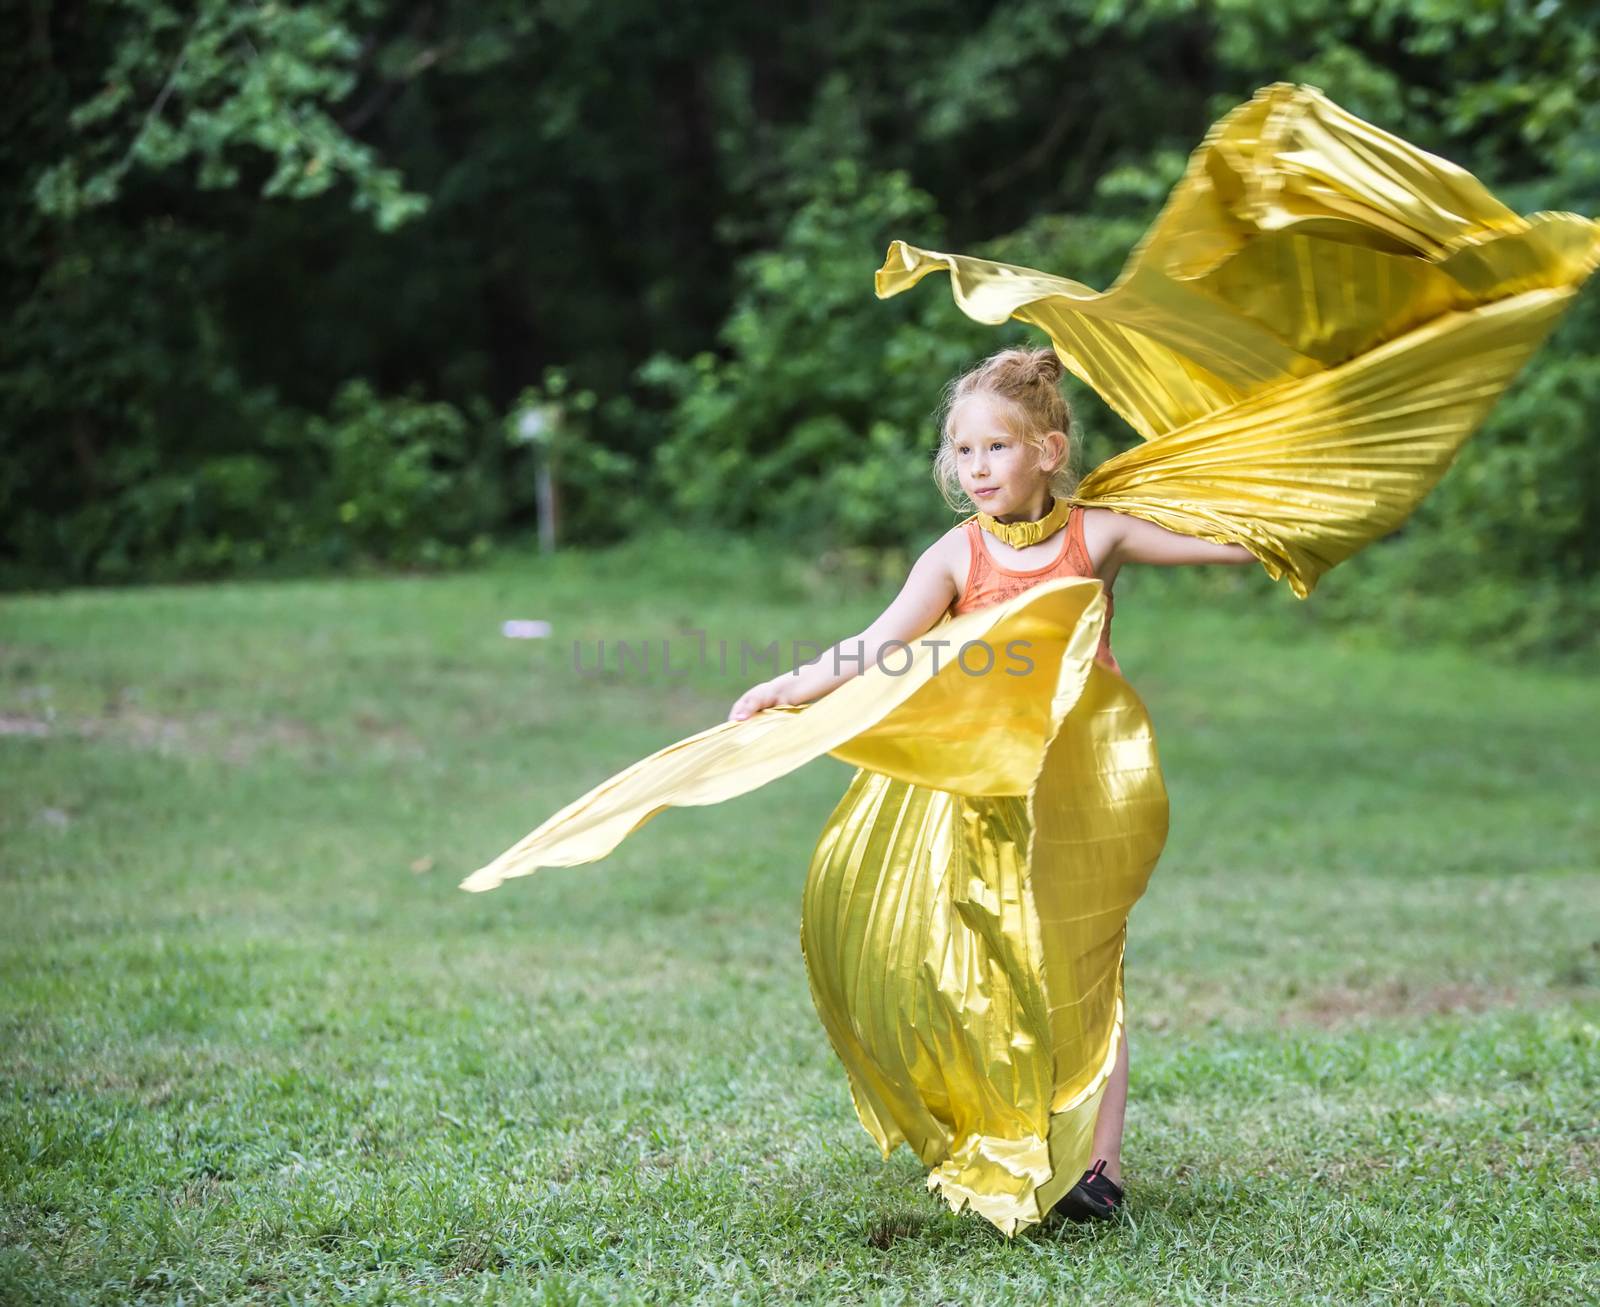 HOT SPRINGS, NC - JULY 9: Cute little girl in golden angelic costume twirling and dancing at the Wild Goose Festival on July 9, 2016 in Hot Springs, NC, USA.